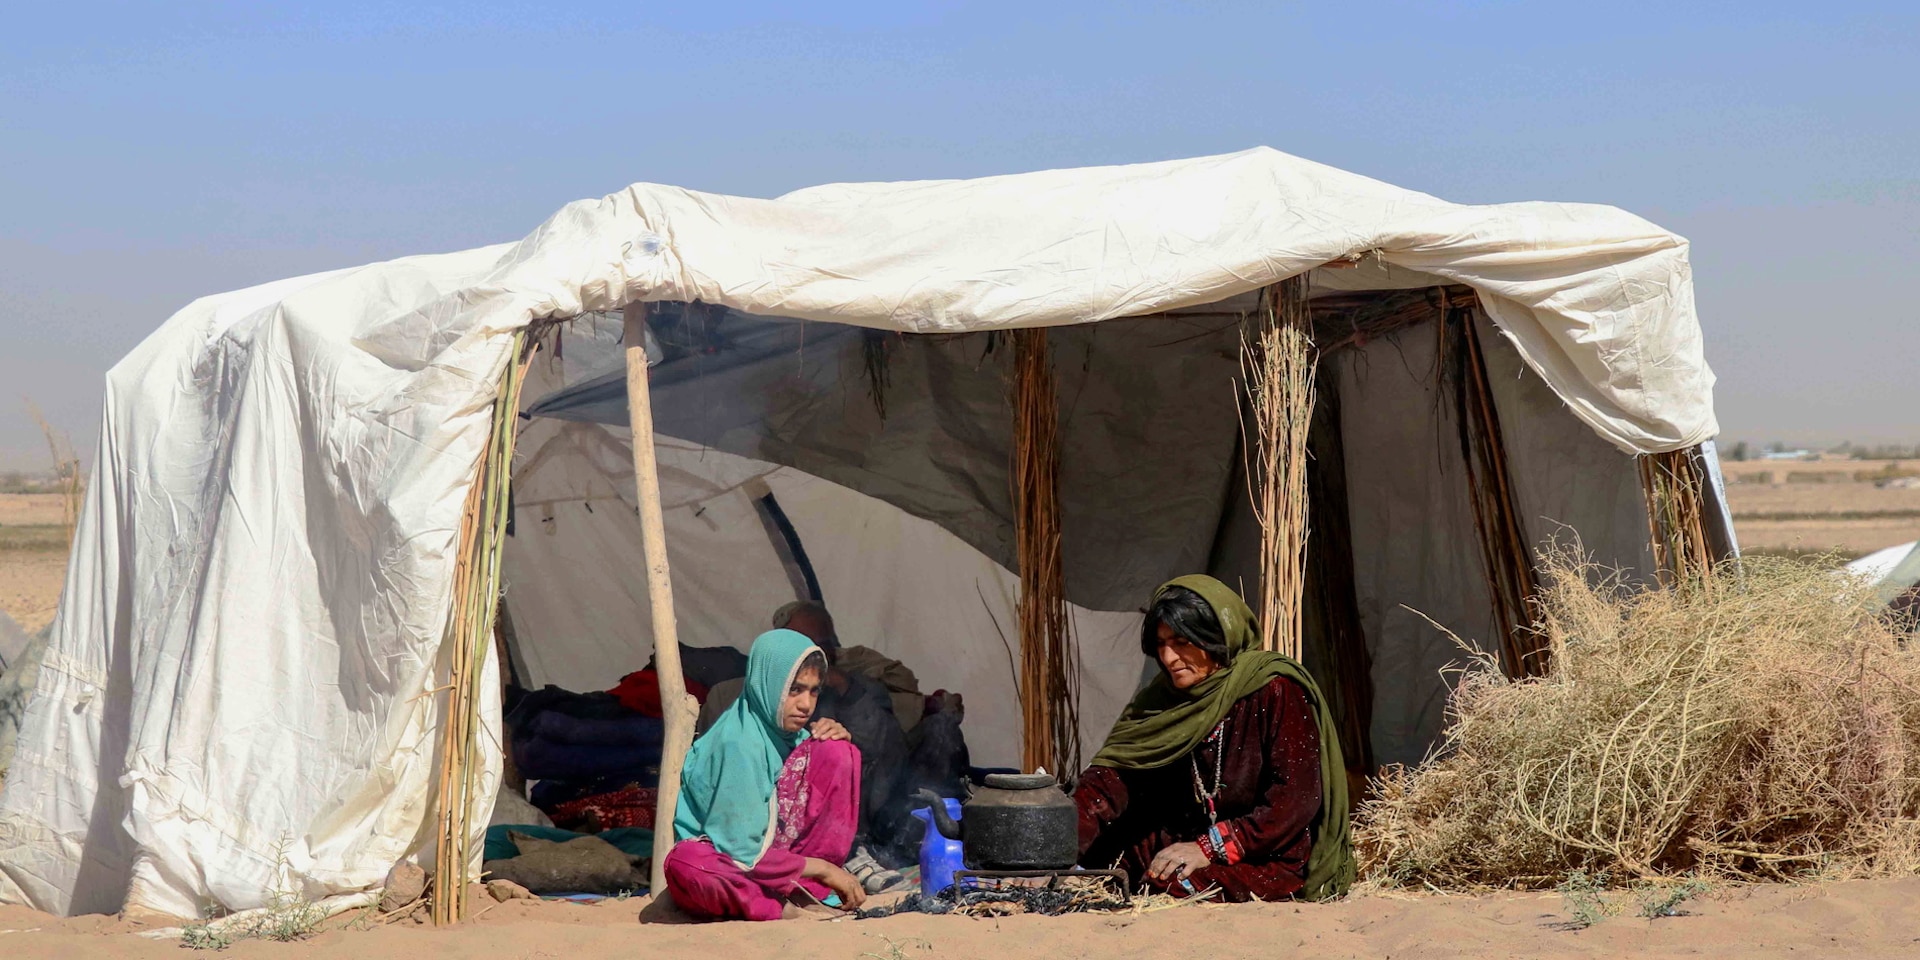 A woman and a young girl sit under a makeshift tent in the desert.